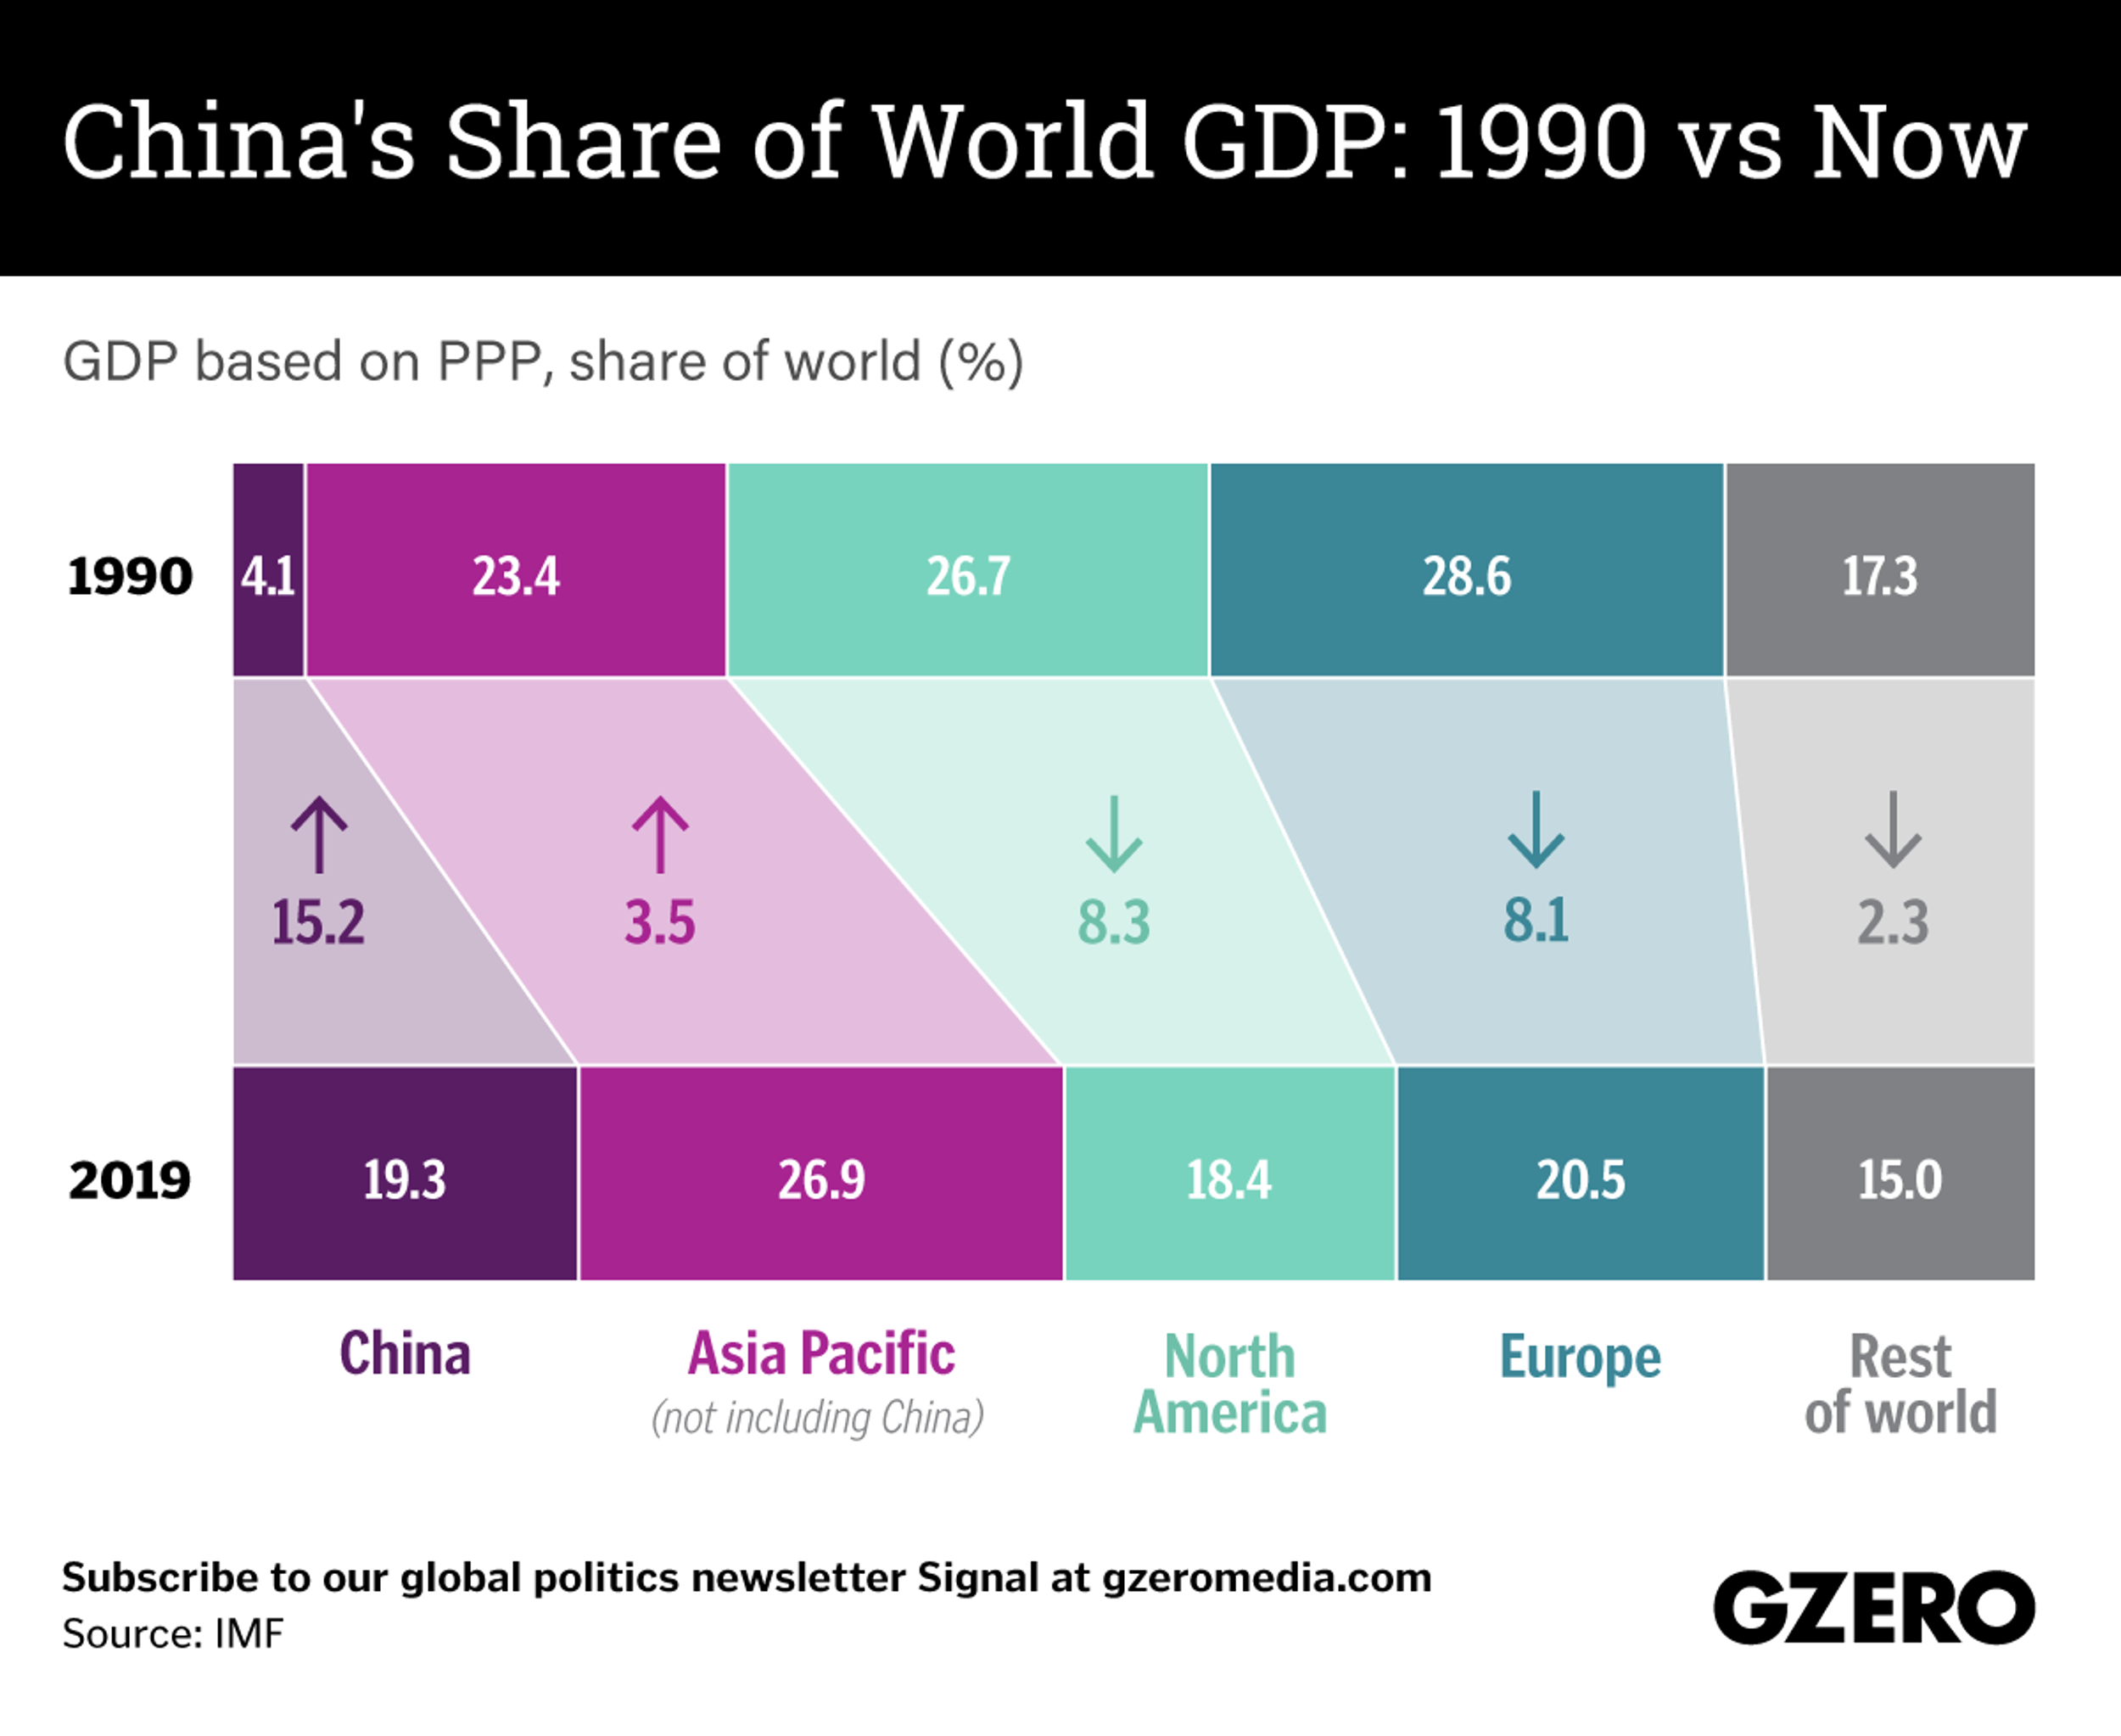 The Graphic Truth: China's share of the global economy, 1990 vs now